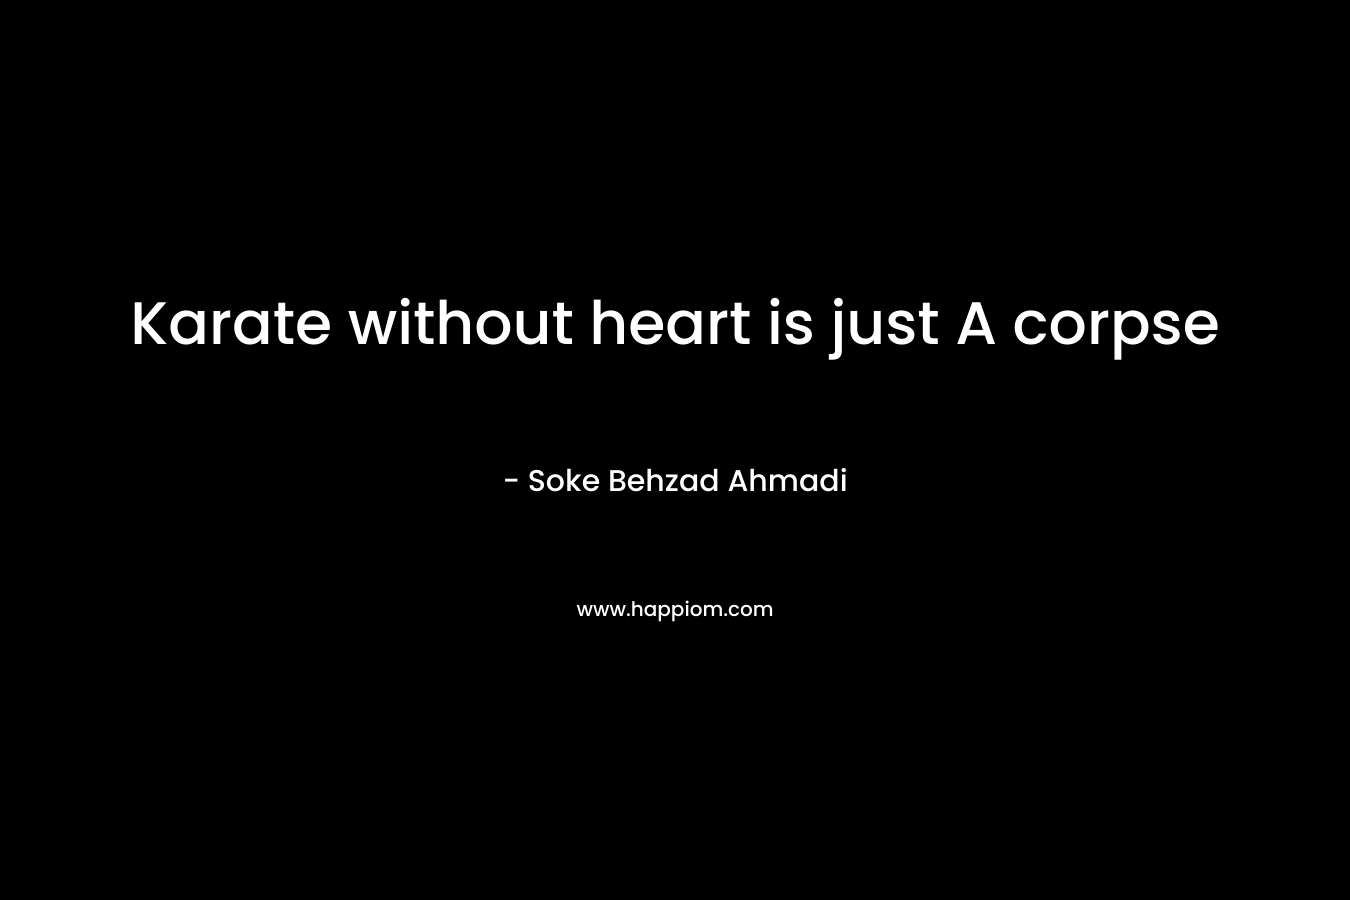 Karate without heart is just A corpse – Soke Behzad Ahmadi